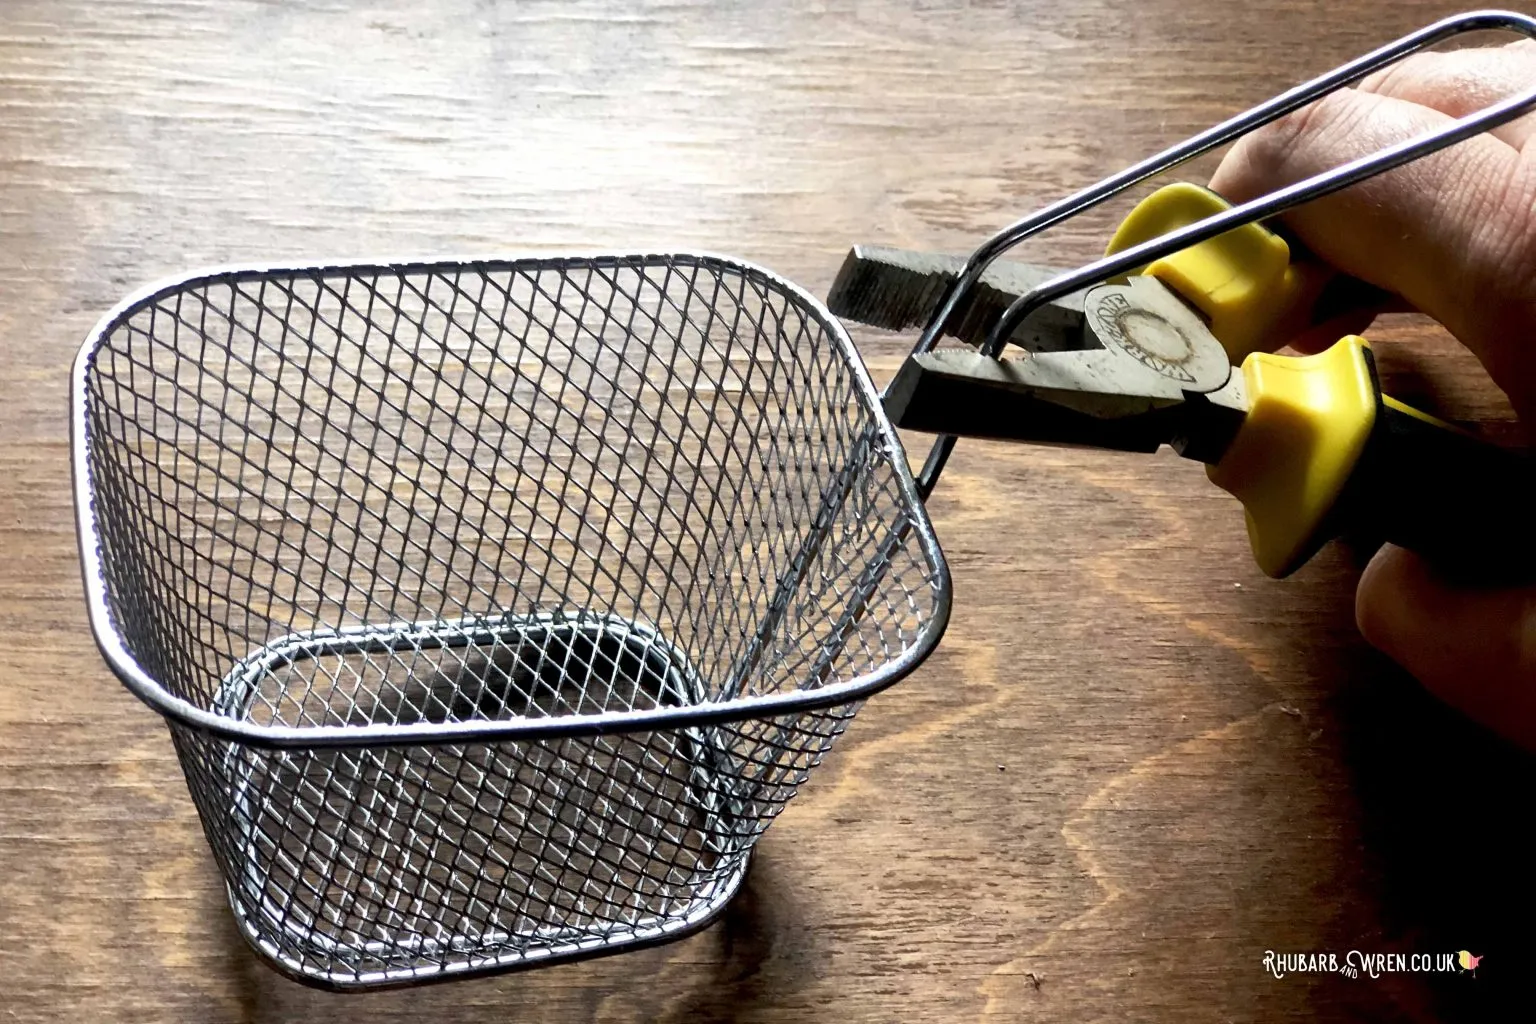 Pinching the handle of a frying basket to make it narrower.